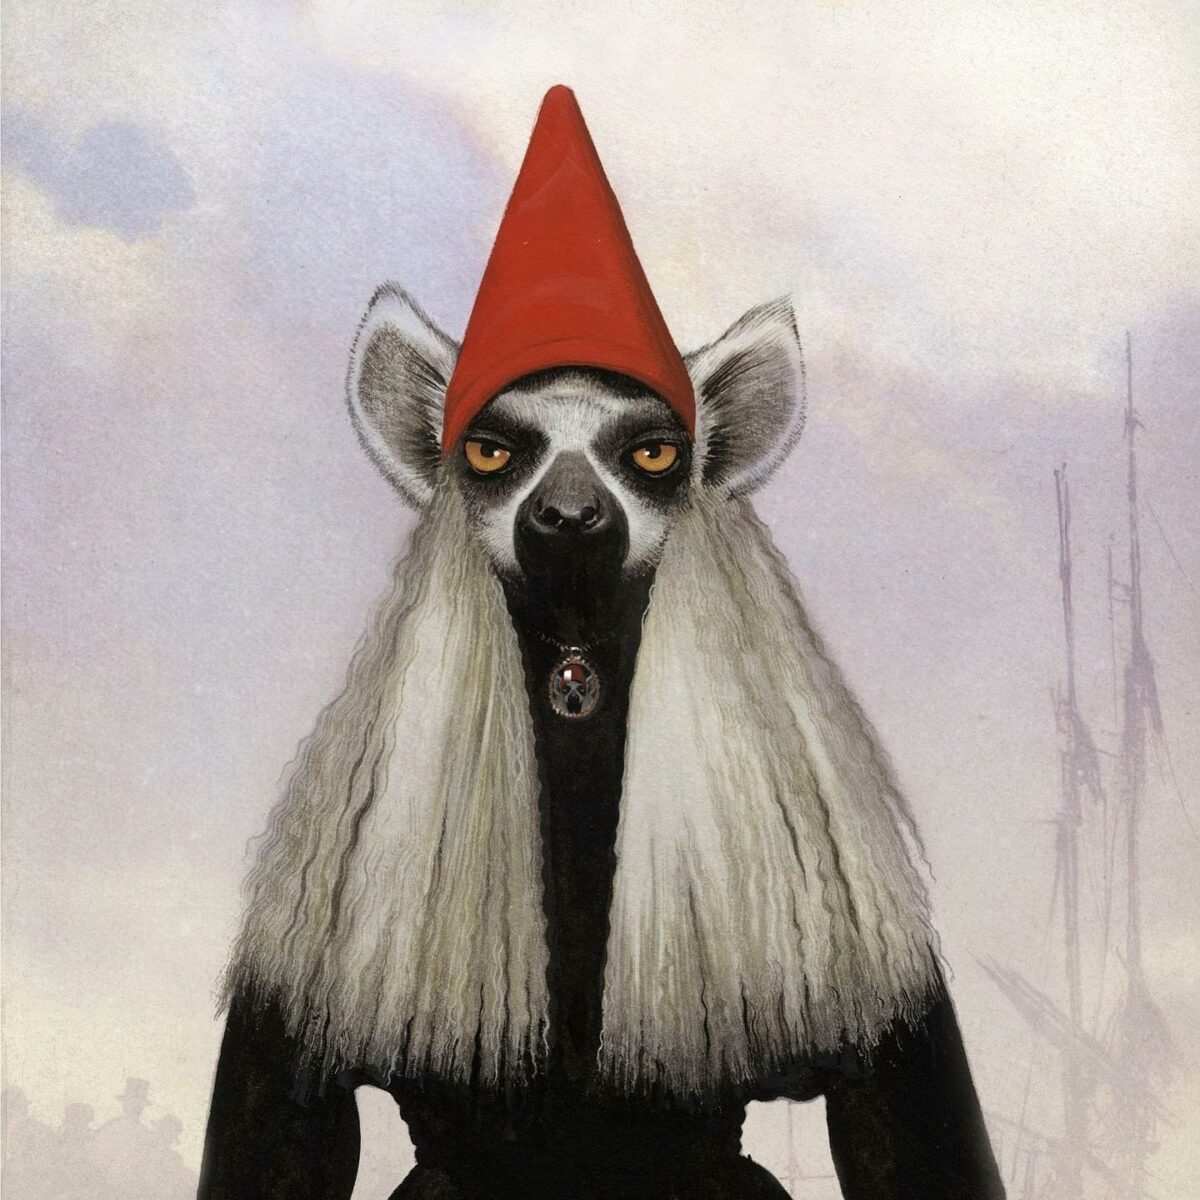 Humorous Anthropomorphized Animal Portraits In The Classical Style By Bill Mayer (18)